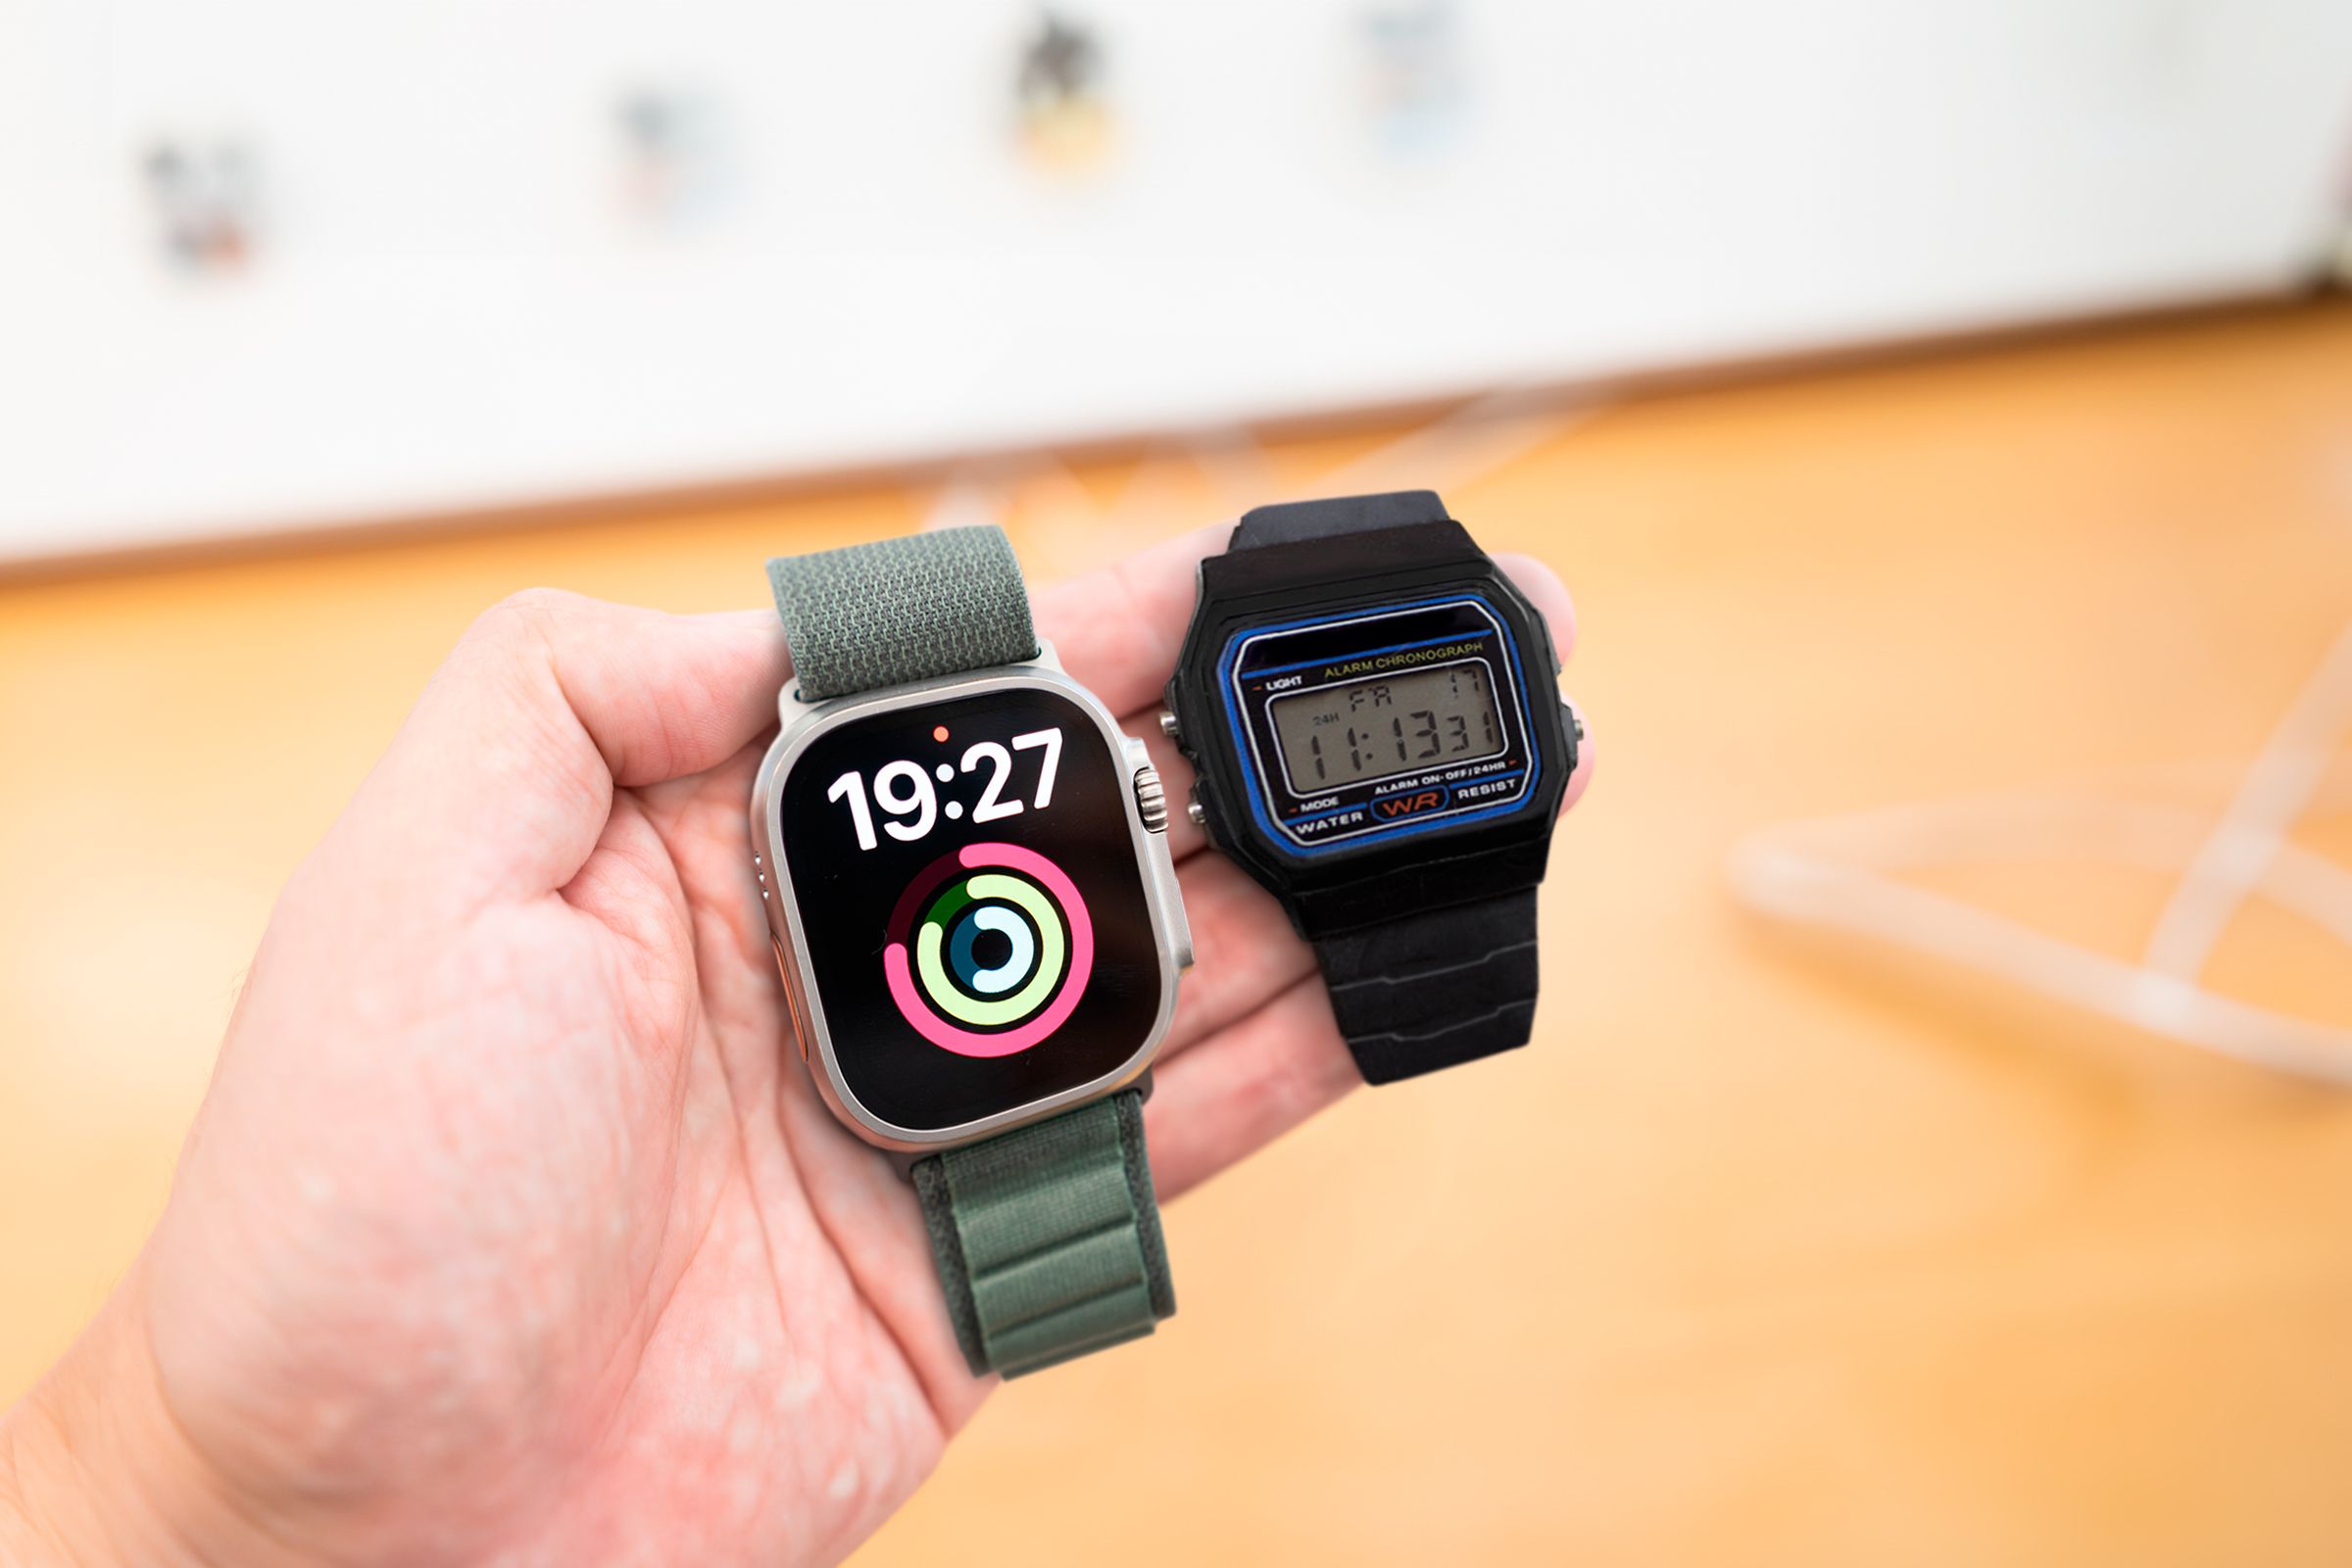 A hand holding an Apple Watch Ultra on the left side, and a Casio F-91W on the right side